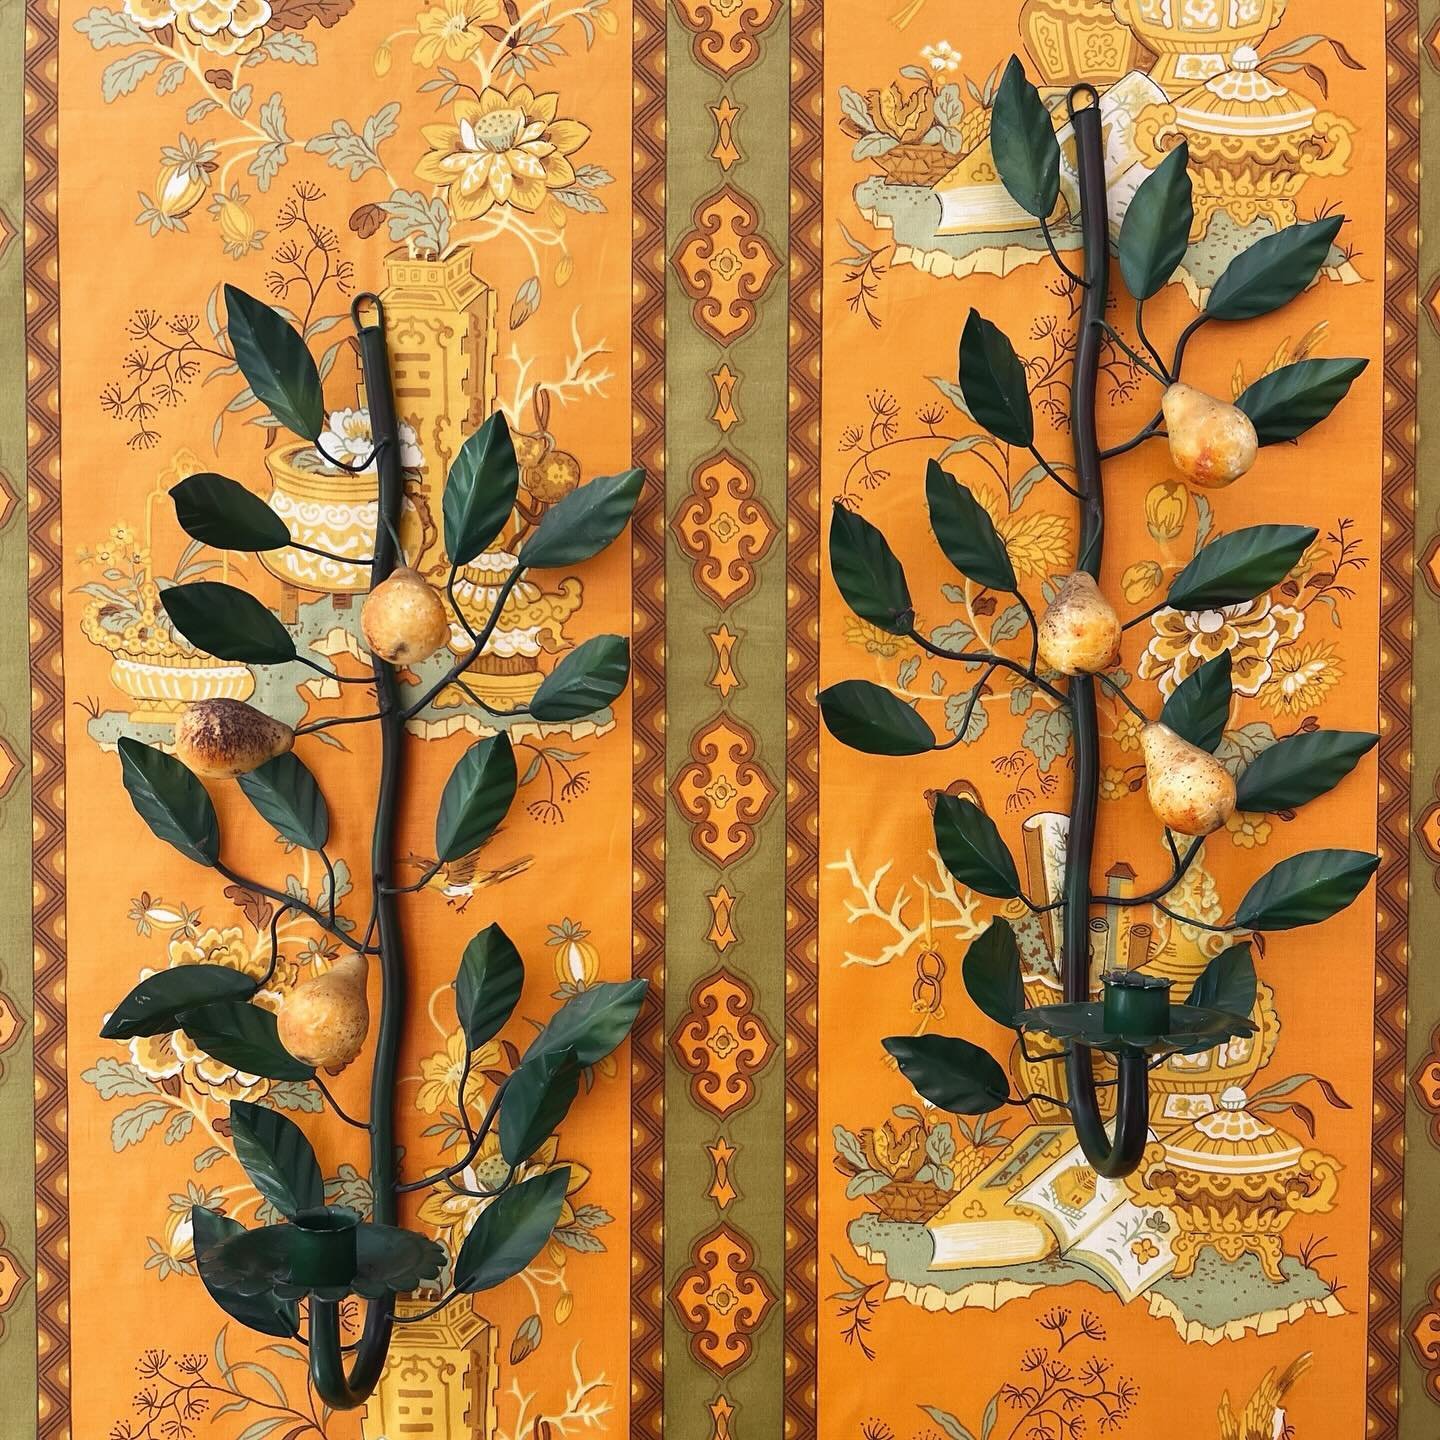 A pair of delightful pear sconces for sale! This Italian tole duo is begging for a punchy-colored taper and would make any wall in your home sing! 💥🍐🧡